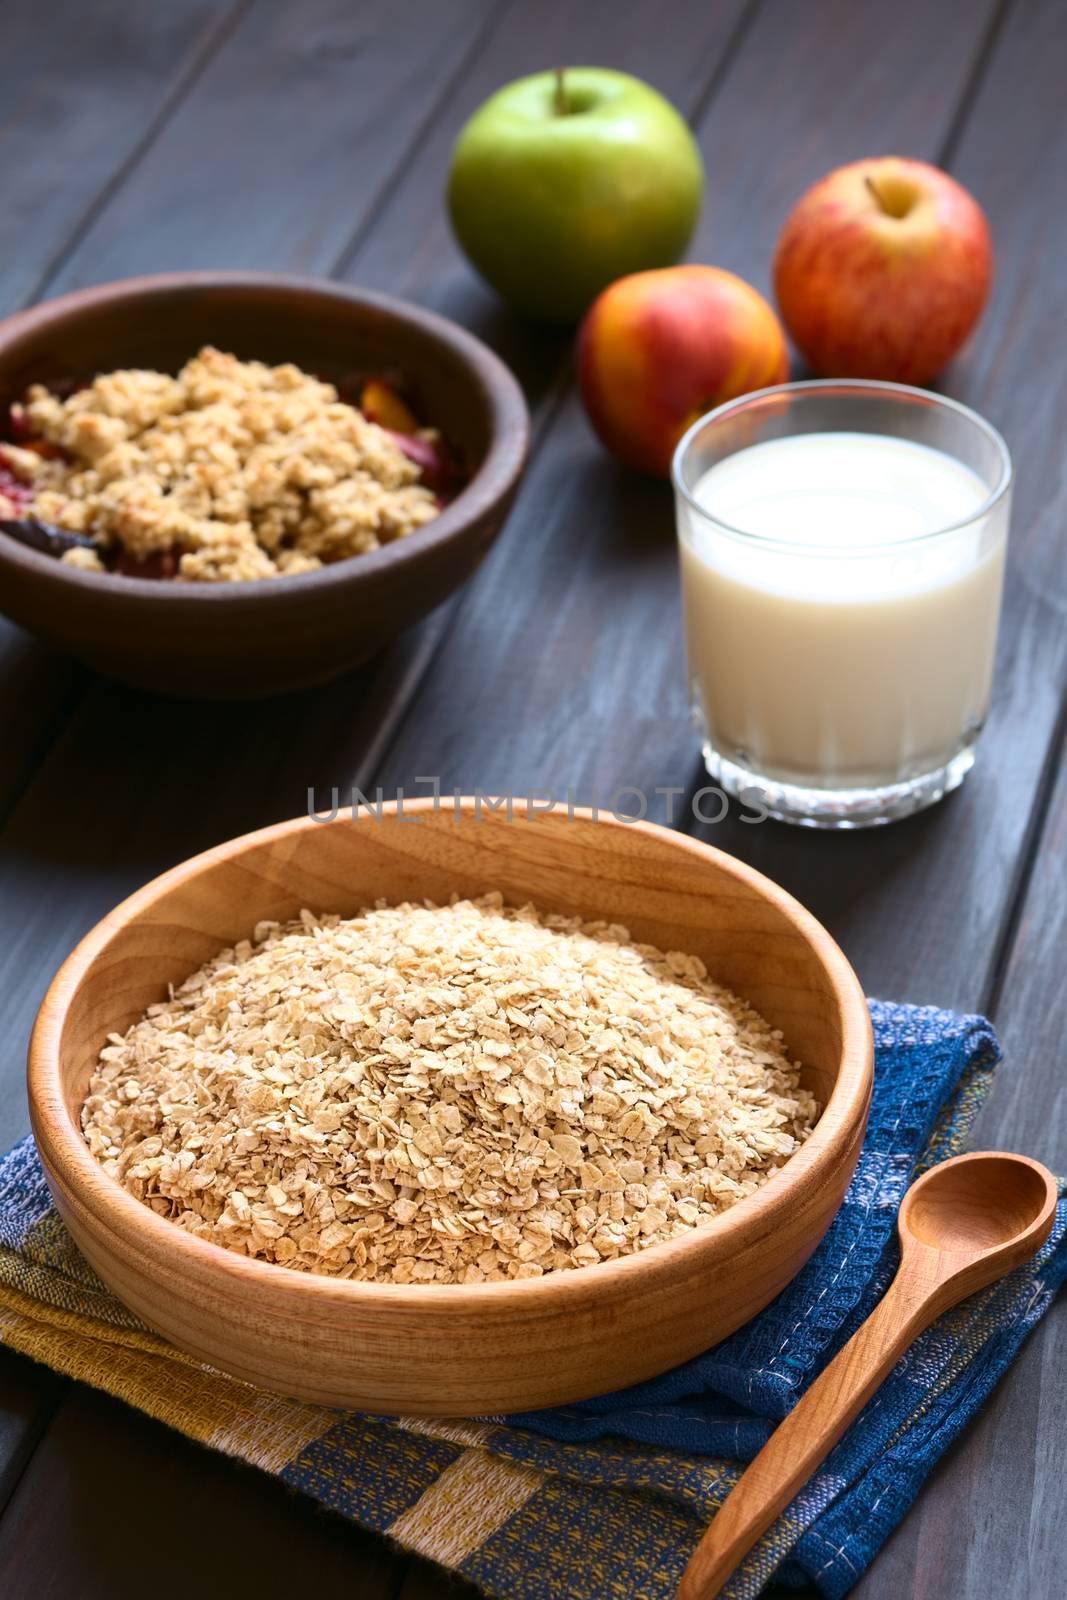 Raw rolled oats in wooden bowl with fruits, glass of milk and a bowl of fruit crumble in the back, photographed on dark wood with natural light (Selective Focus, Focus one third into the oats)